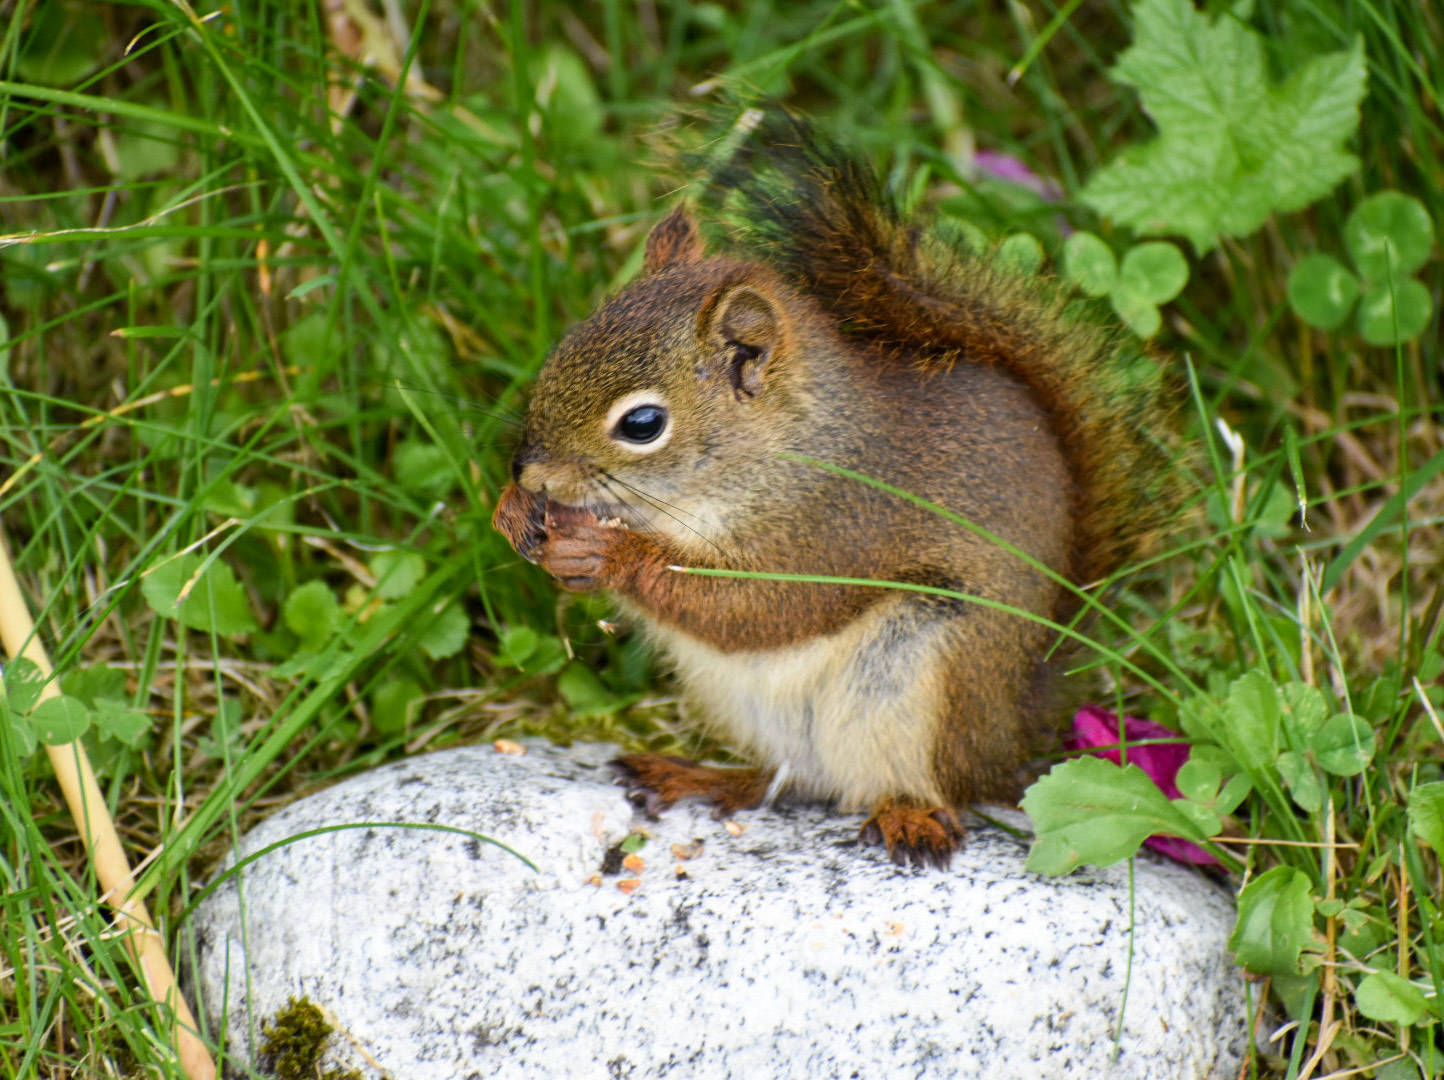 A squirrel snacks on seeds near the Shrine of St. Therese. (Courtesy Photo | Eston Jennings)